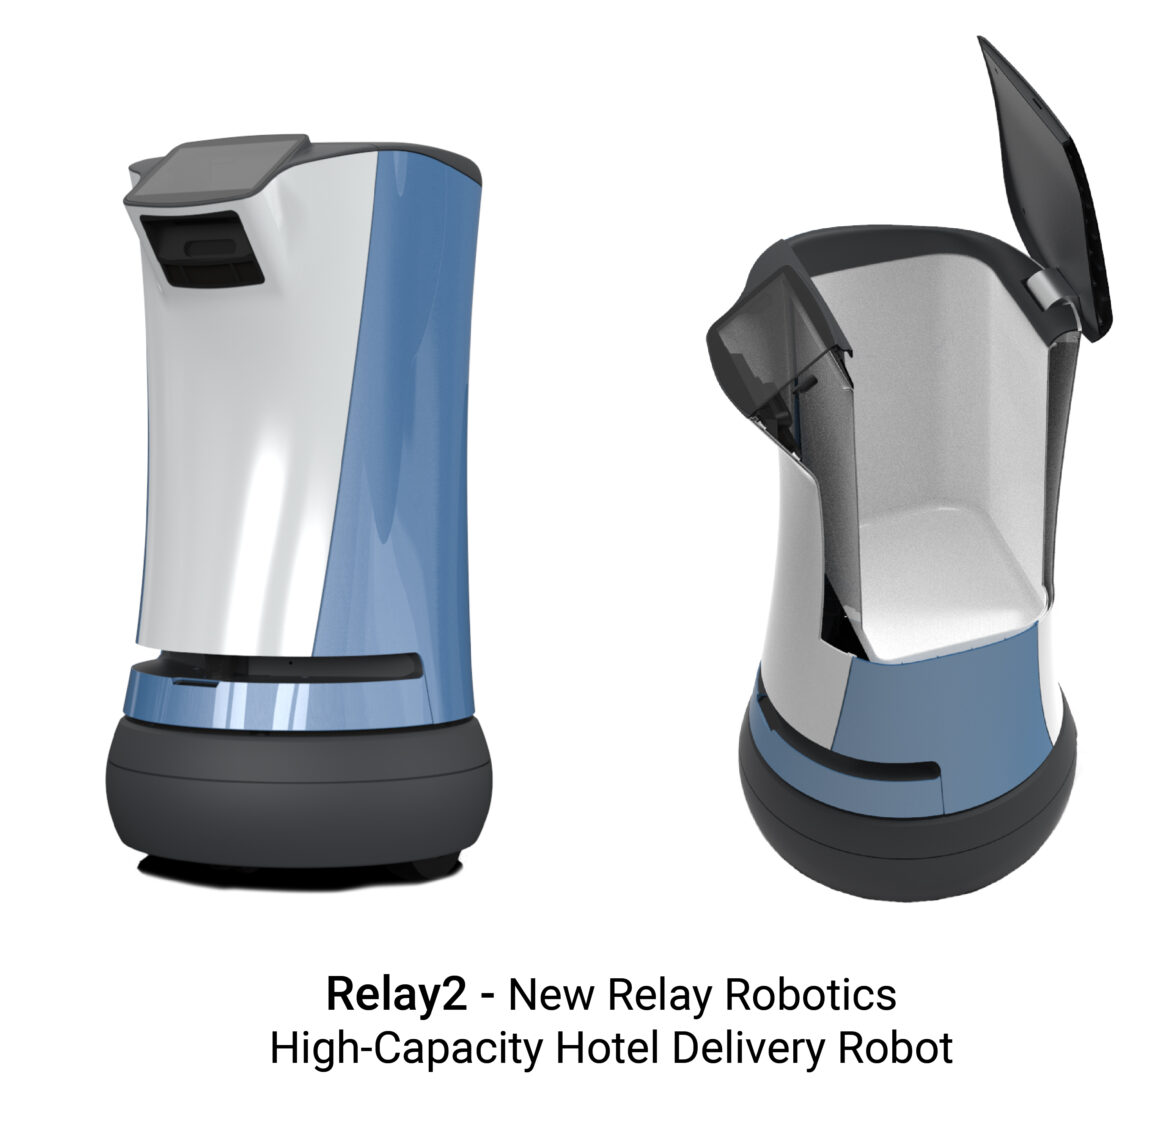 Relay Robotics Introduces Relay2, The New High-Capacity Hotel Delivery Robot